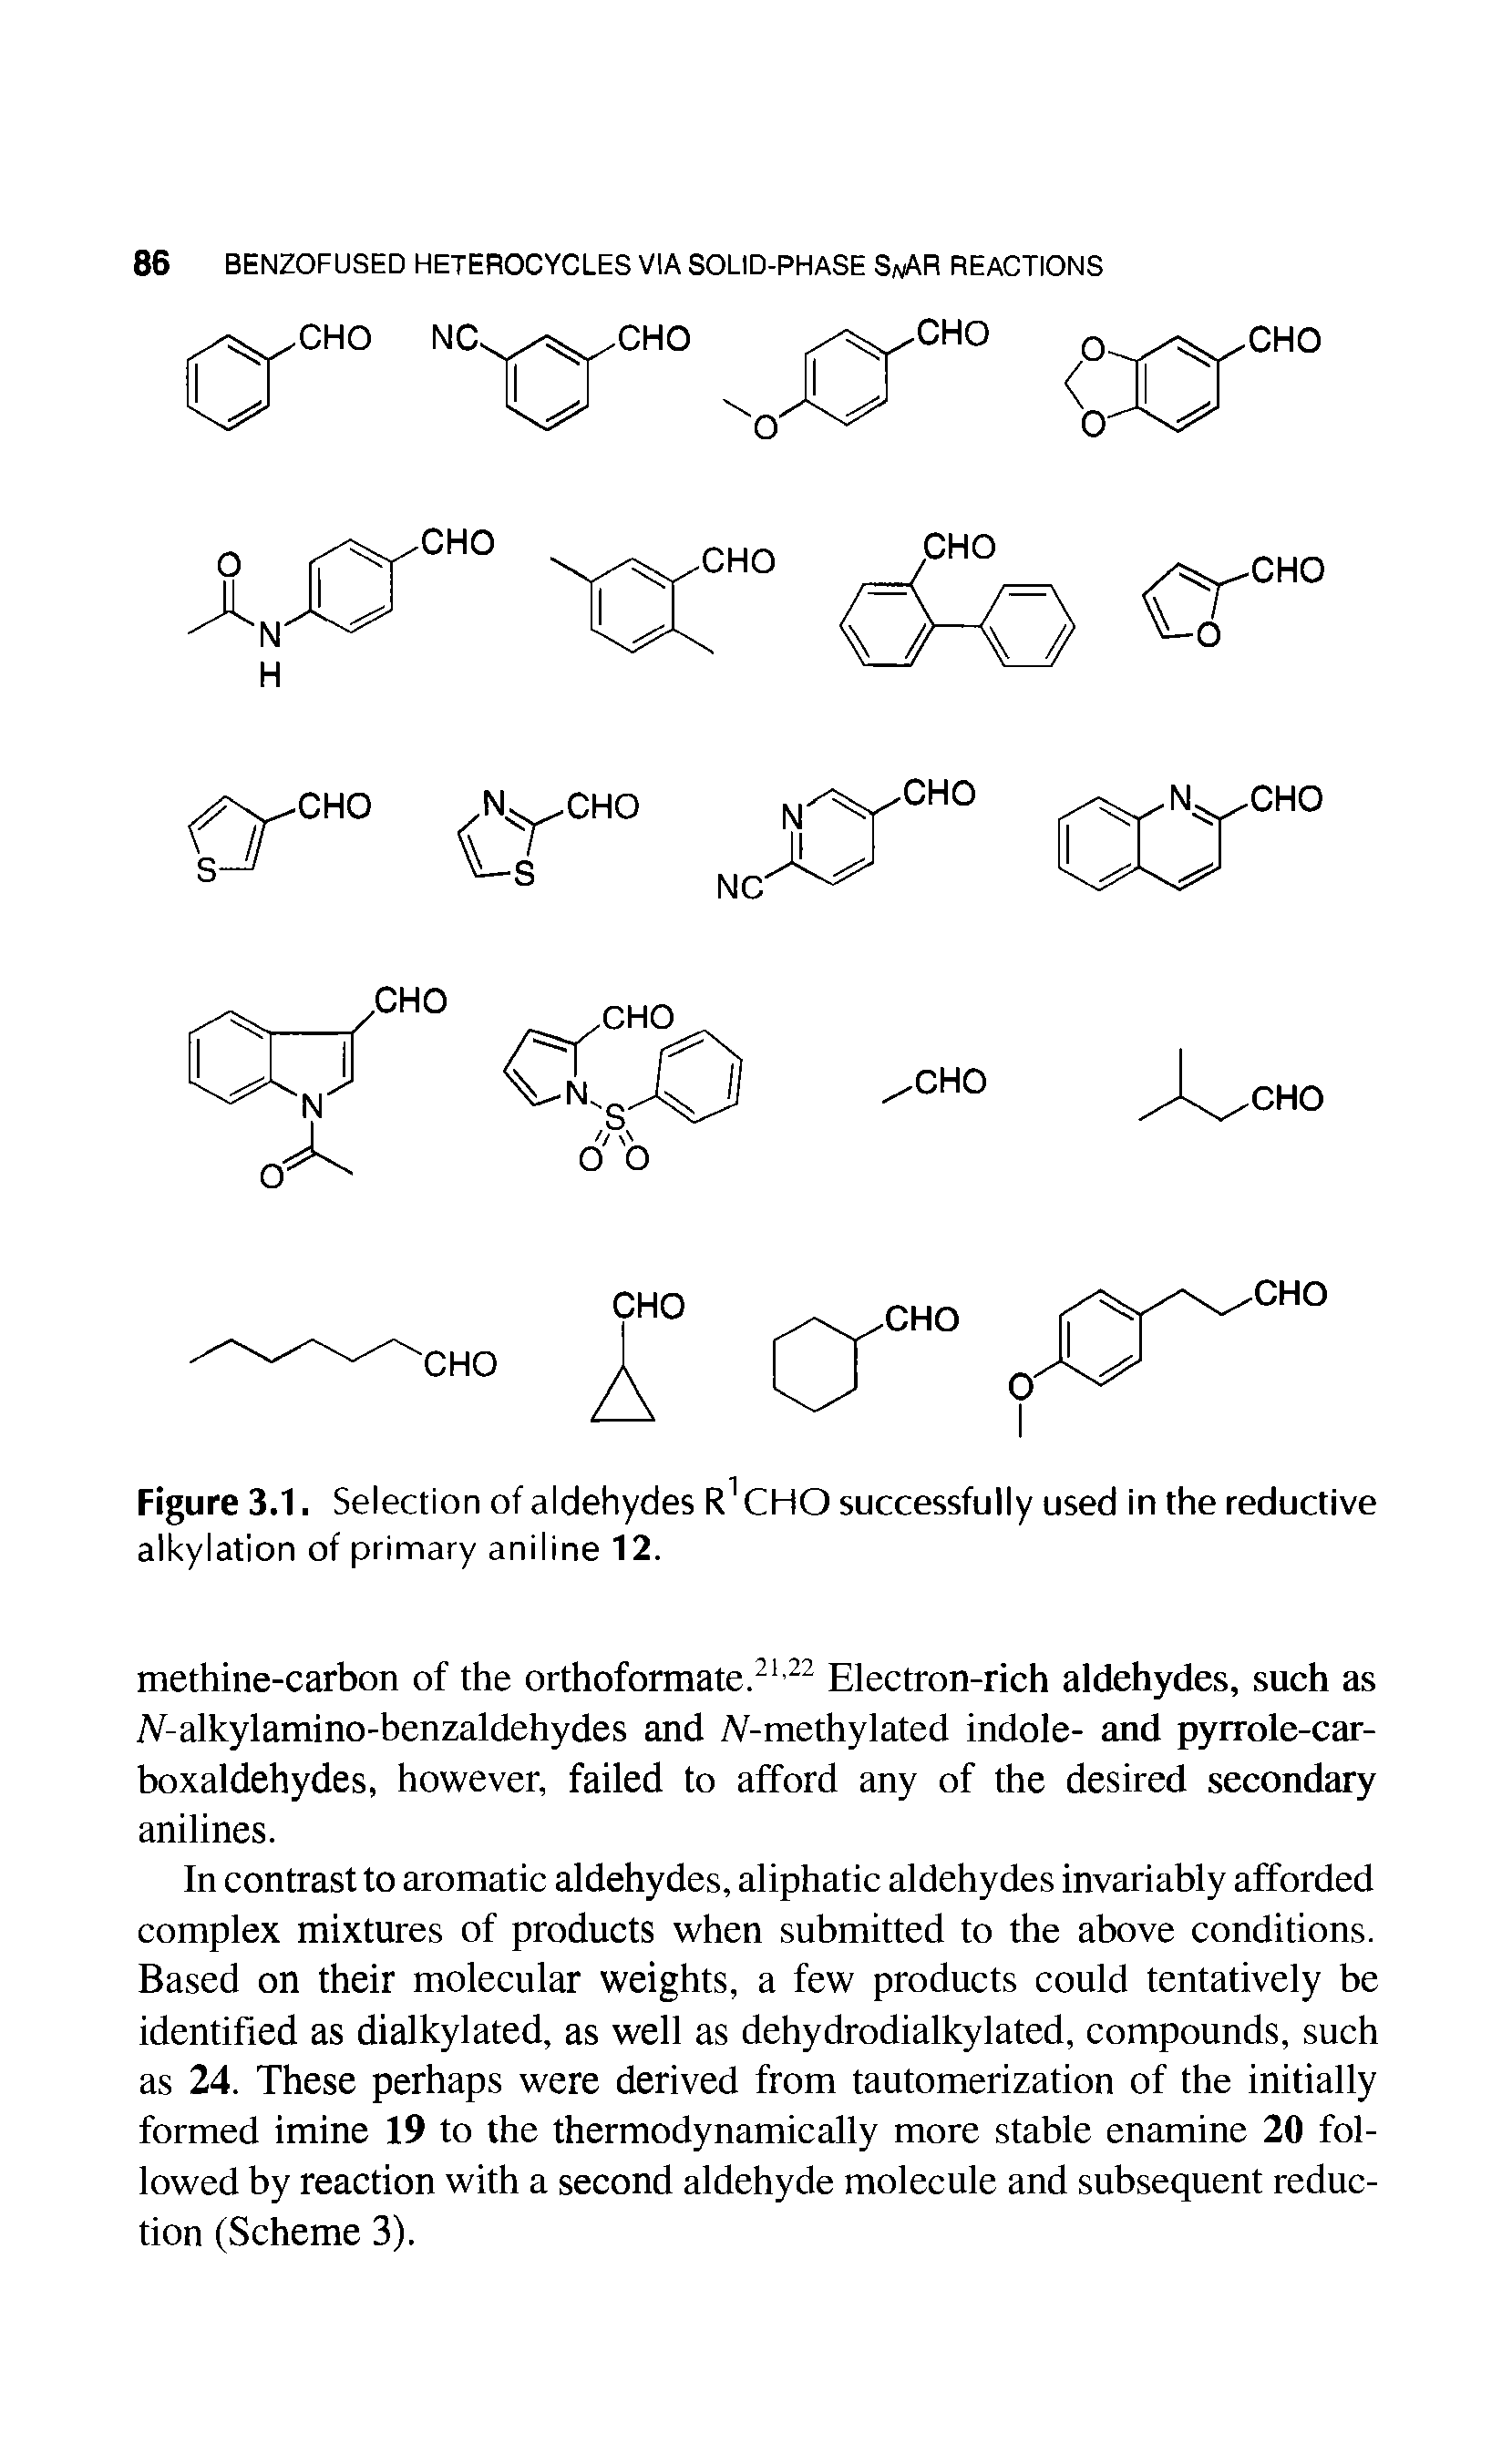 Figure 3.1. Selection of aldehydes R1 CHO successfully used in the reductive alkylation of primary aniline 12.